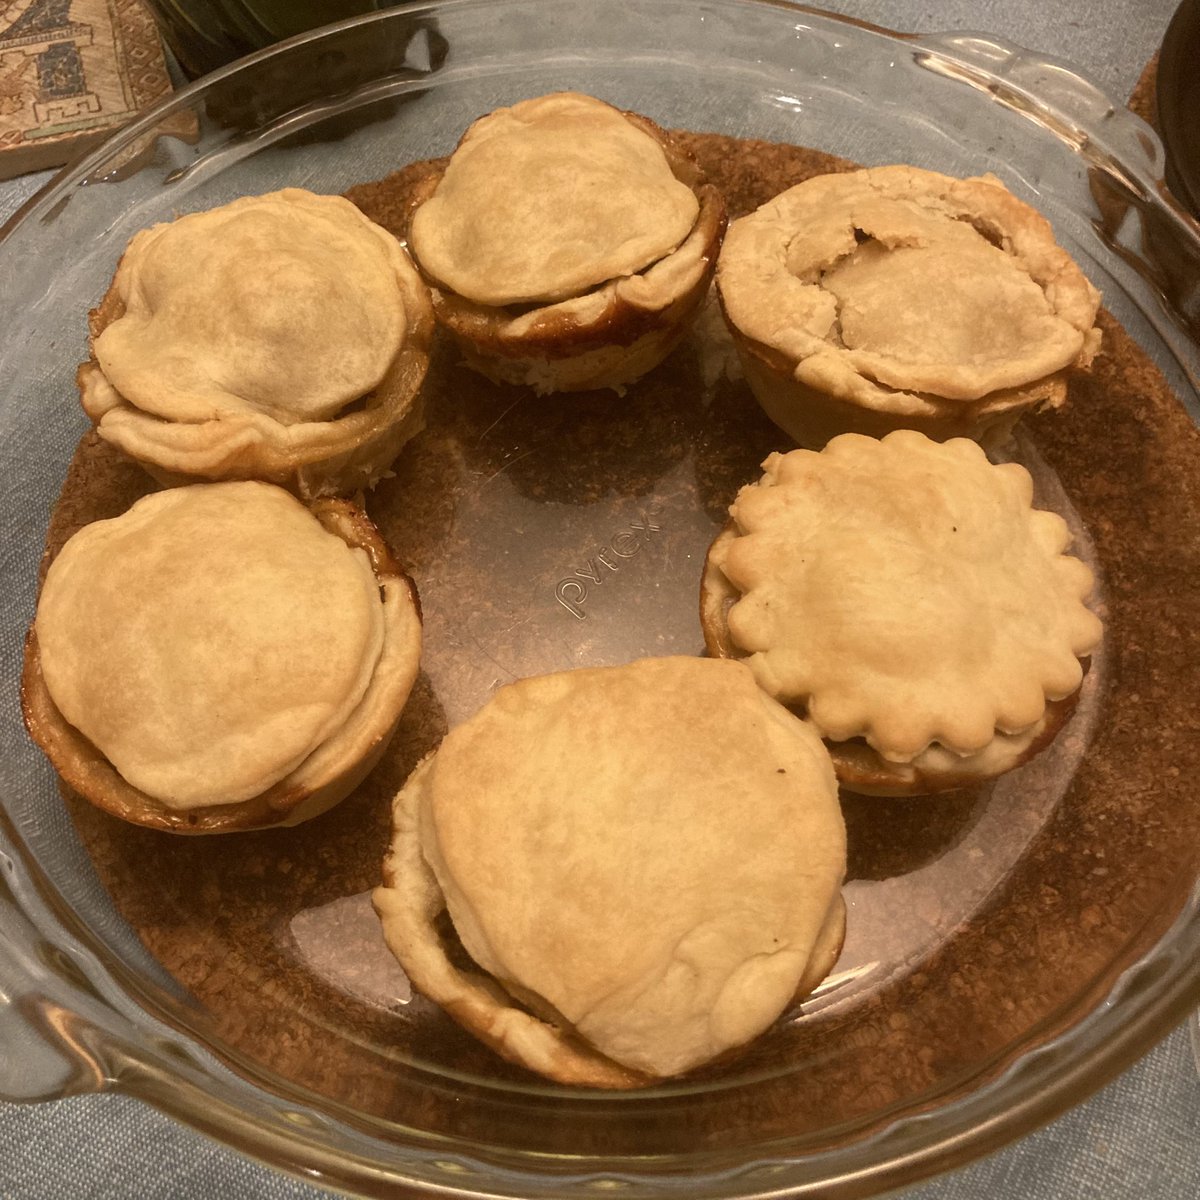 Supper tonight was mincemeat pies, made with REAL homemade mincemeat. 18th century recipe. Fruit, beef, and spices, been in a Mason jar of brandy since November. Simple butter paste crust.  That was a LOT of brandy. 😋 #CookingIsMyTherapy #HistoricFoodways #Mincemeat